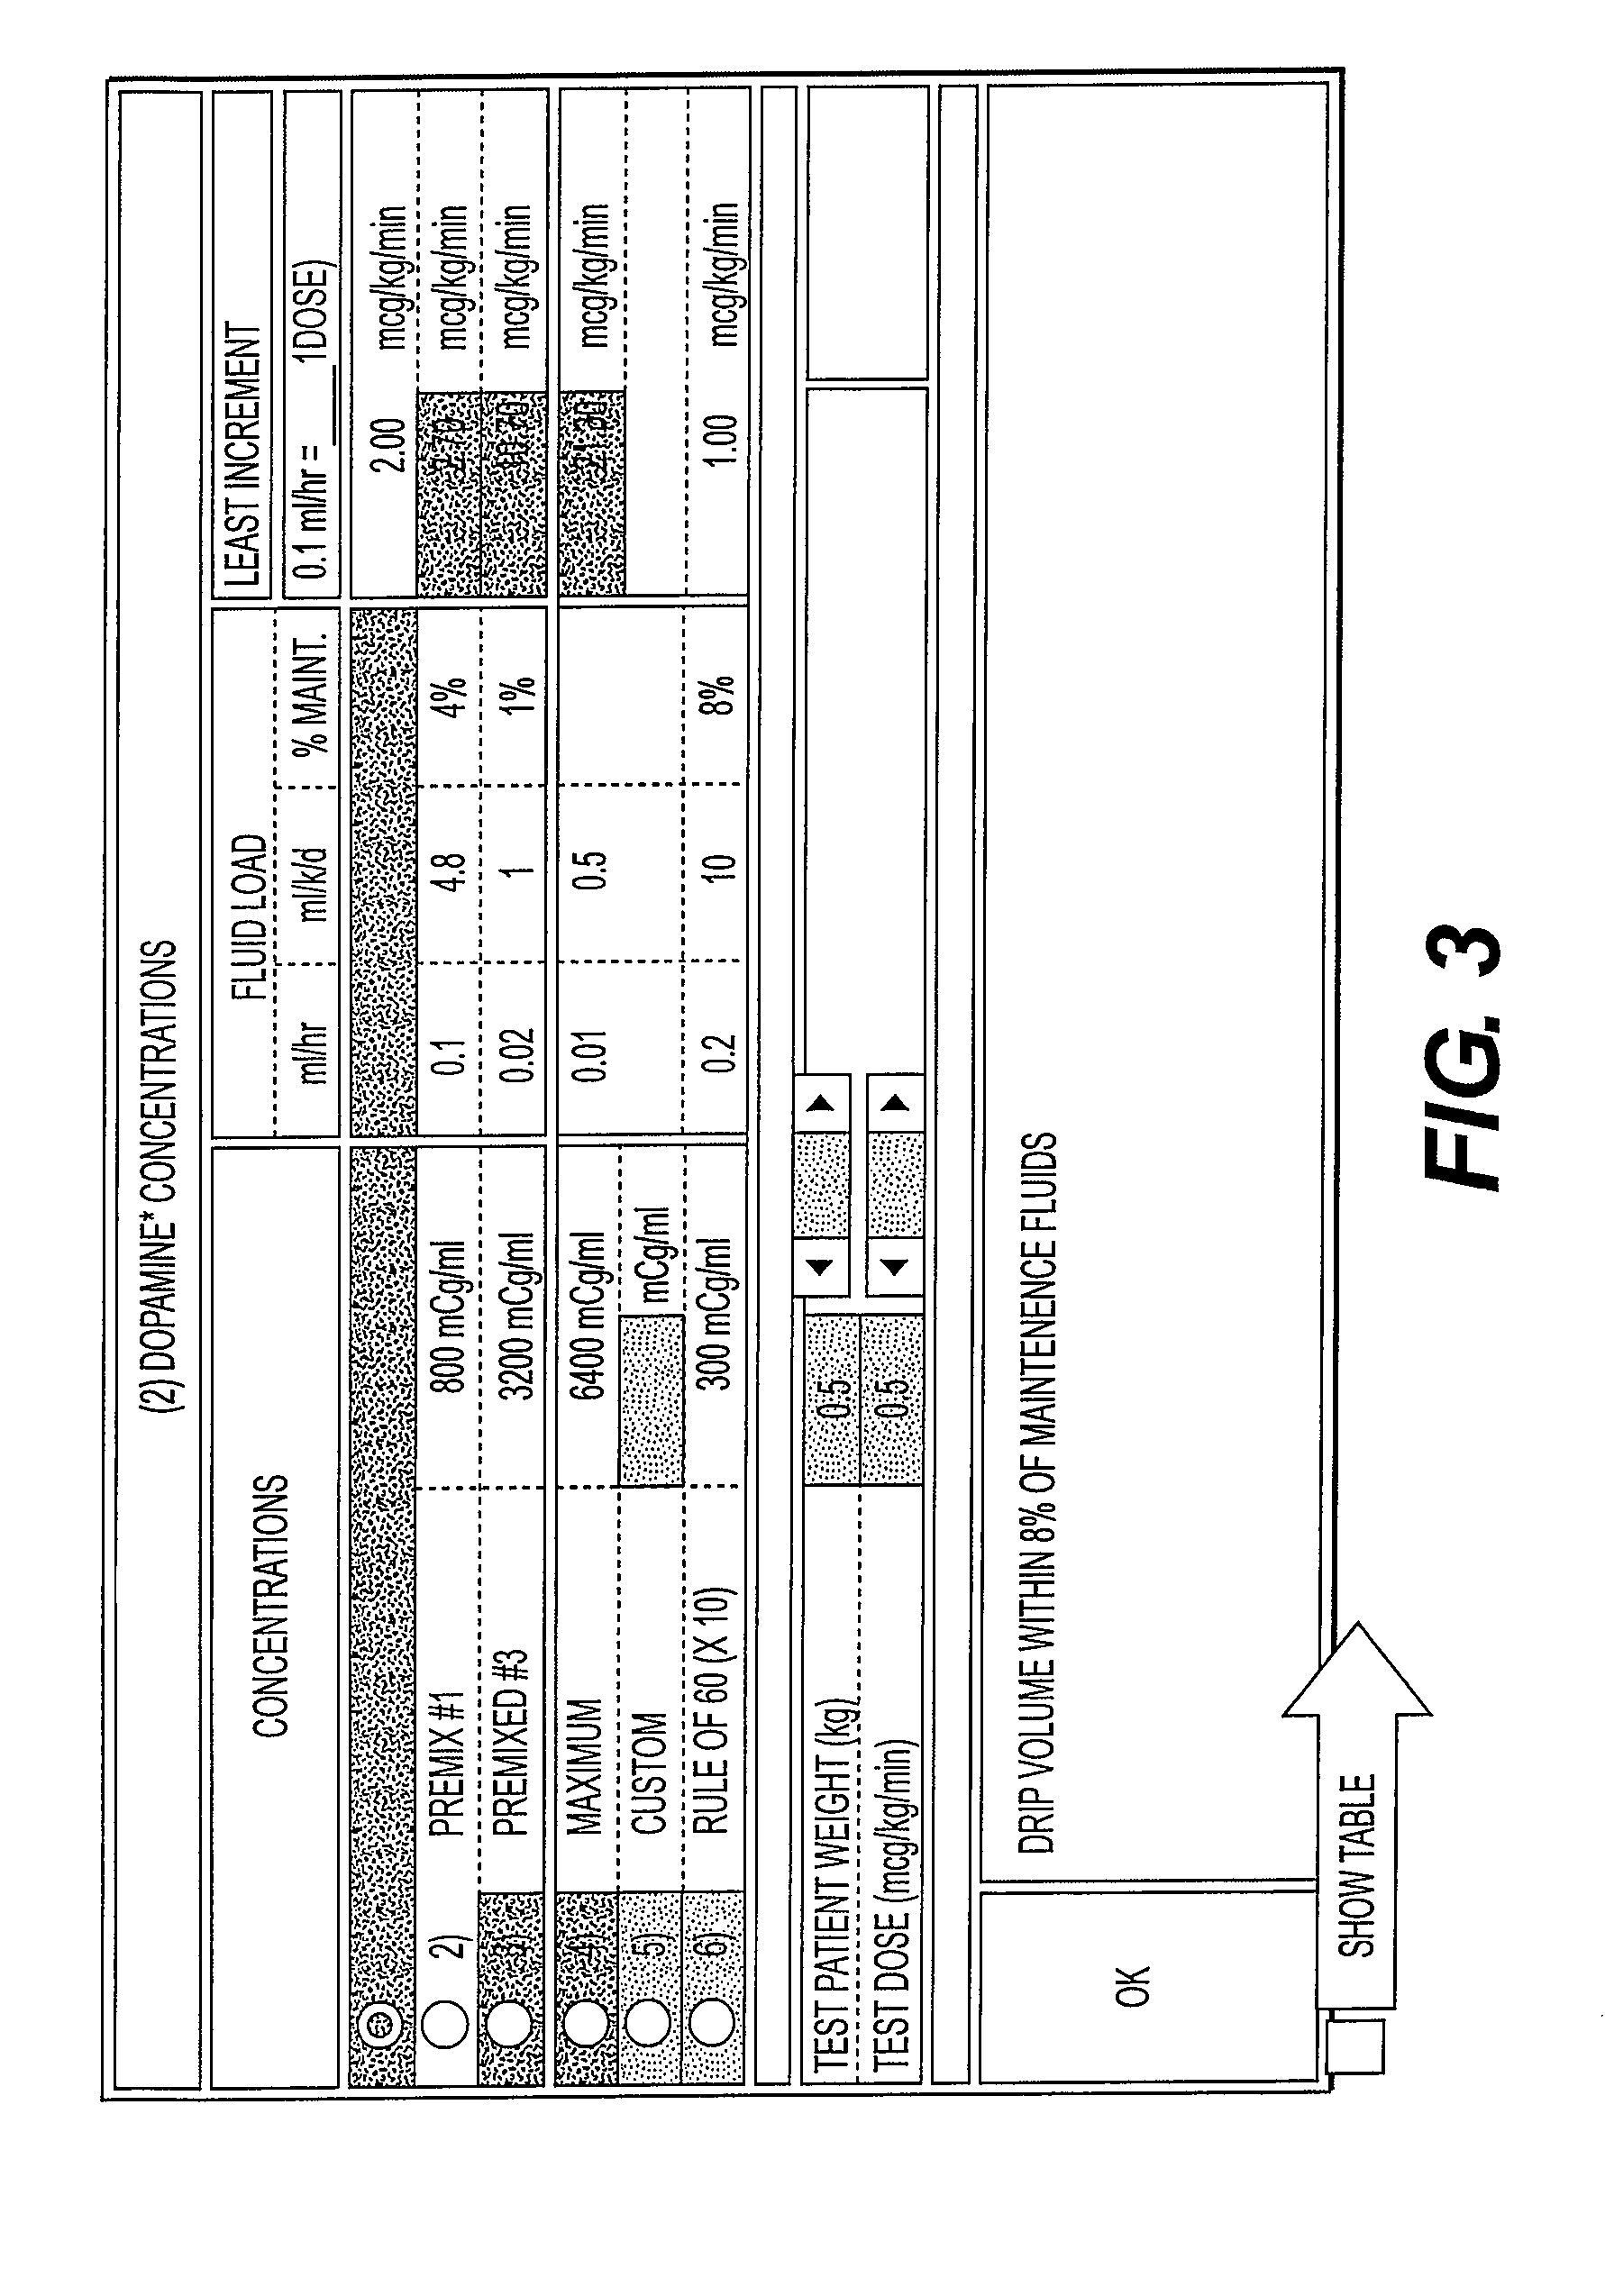 Apparatus and method for providing optimal concentrations for medication infusions